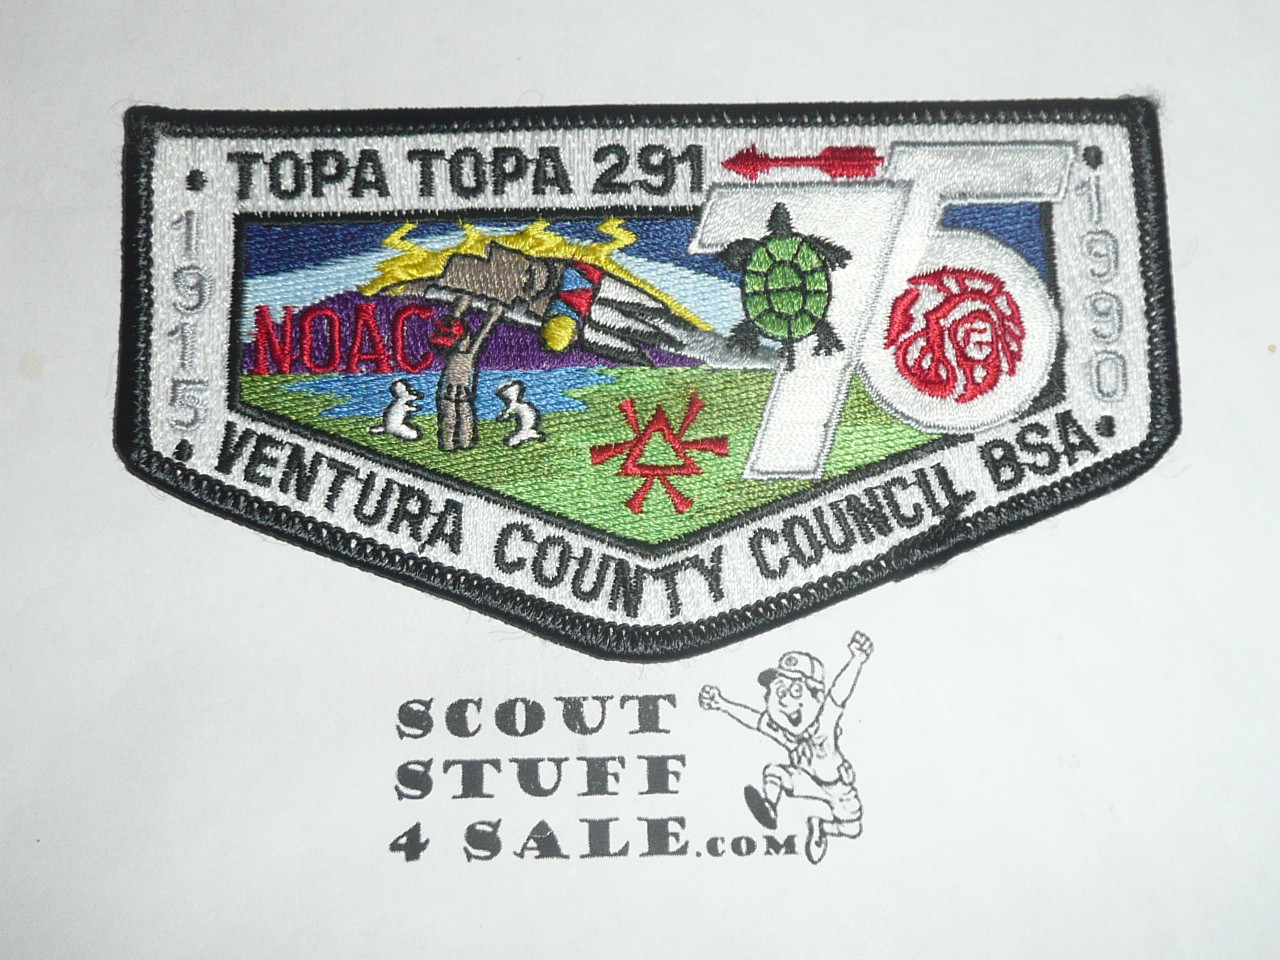 Order of the Arrow Lodge #291 Topa Topa s37 OA 75th Anniversary and NOAC Flap Patch